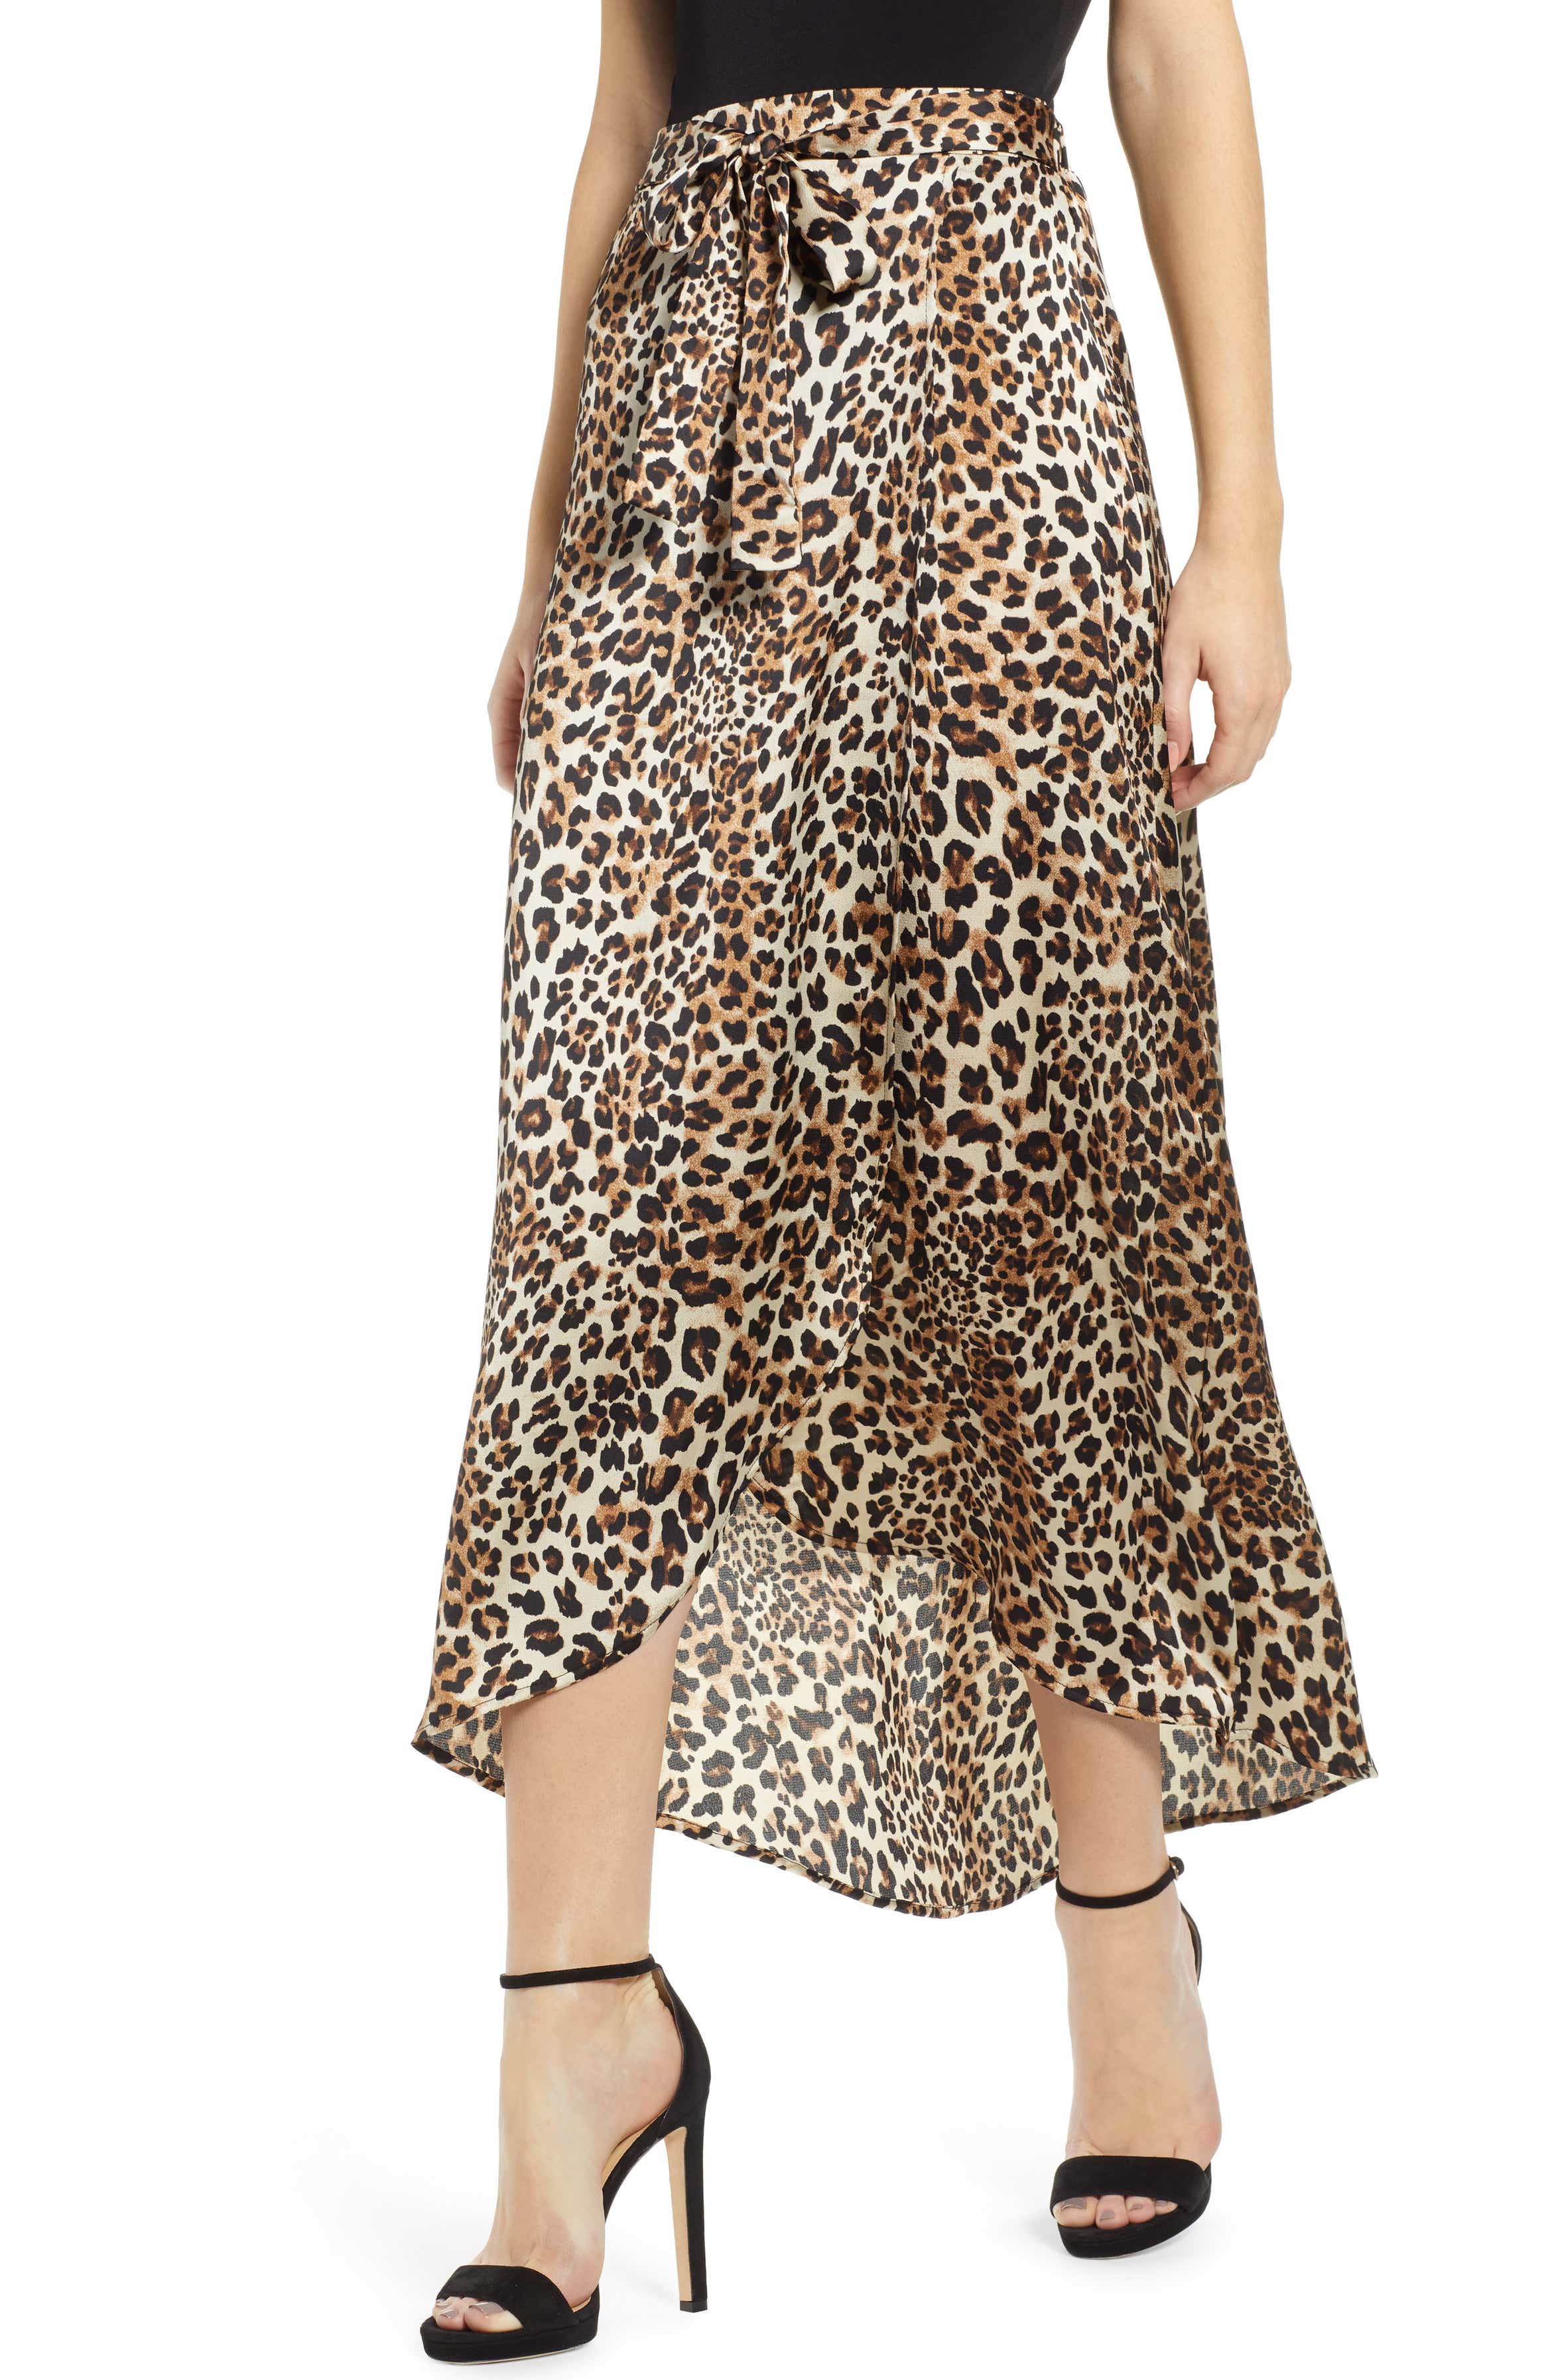 Know One Cares Leopard Print Maxi Skirt | Nordstrom